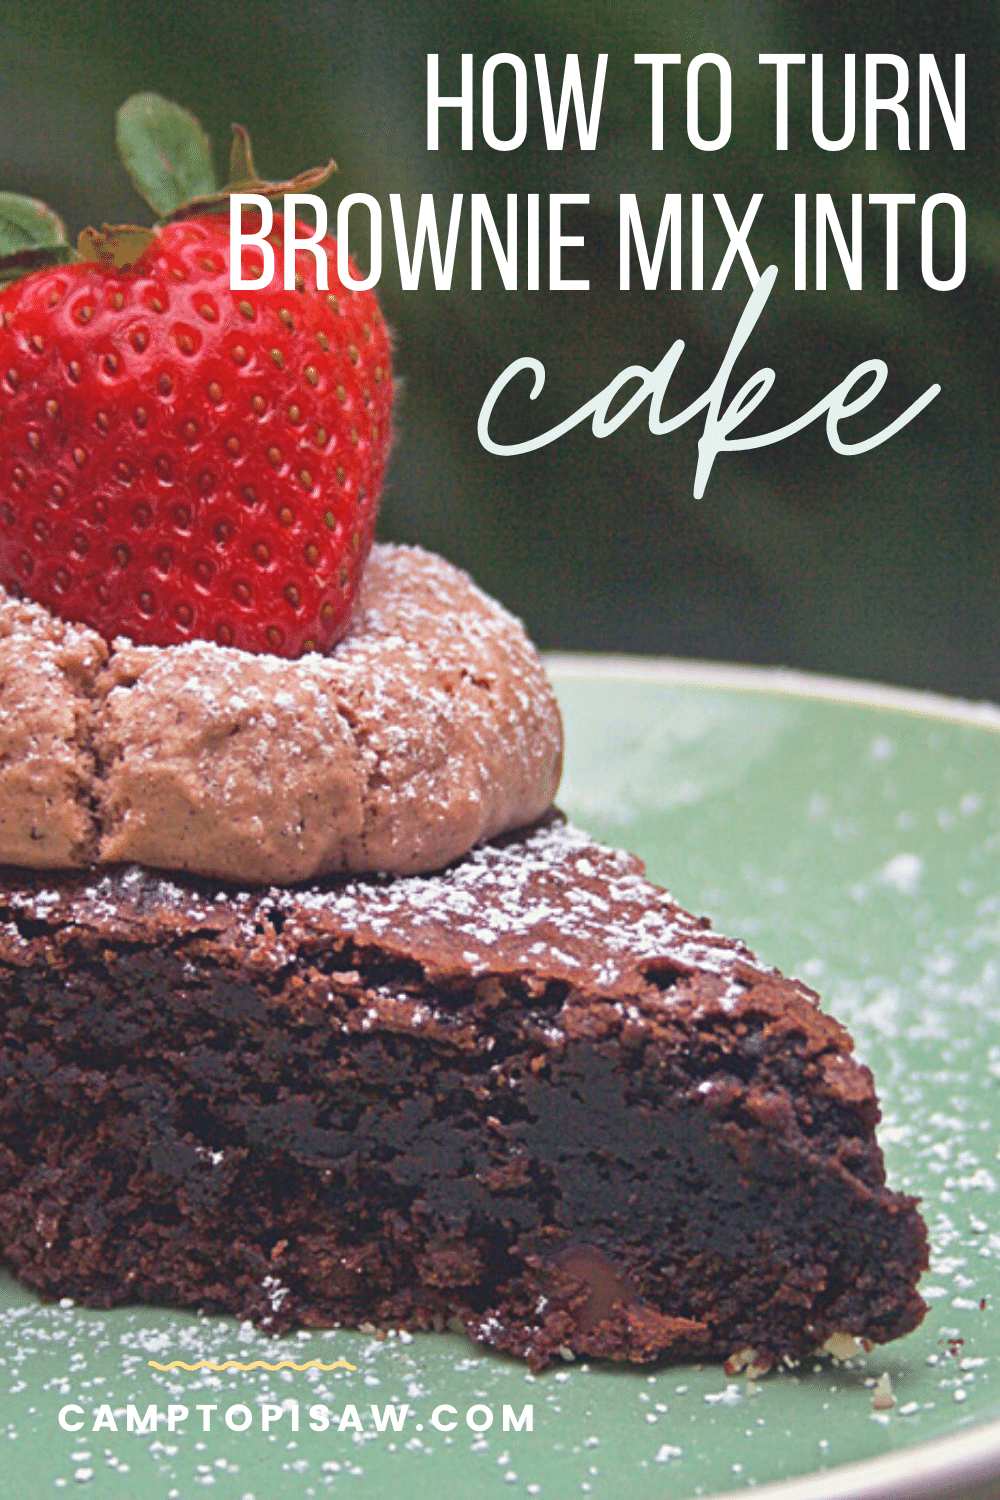 How To Turn Brownie Mix Into Cake